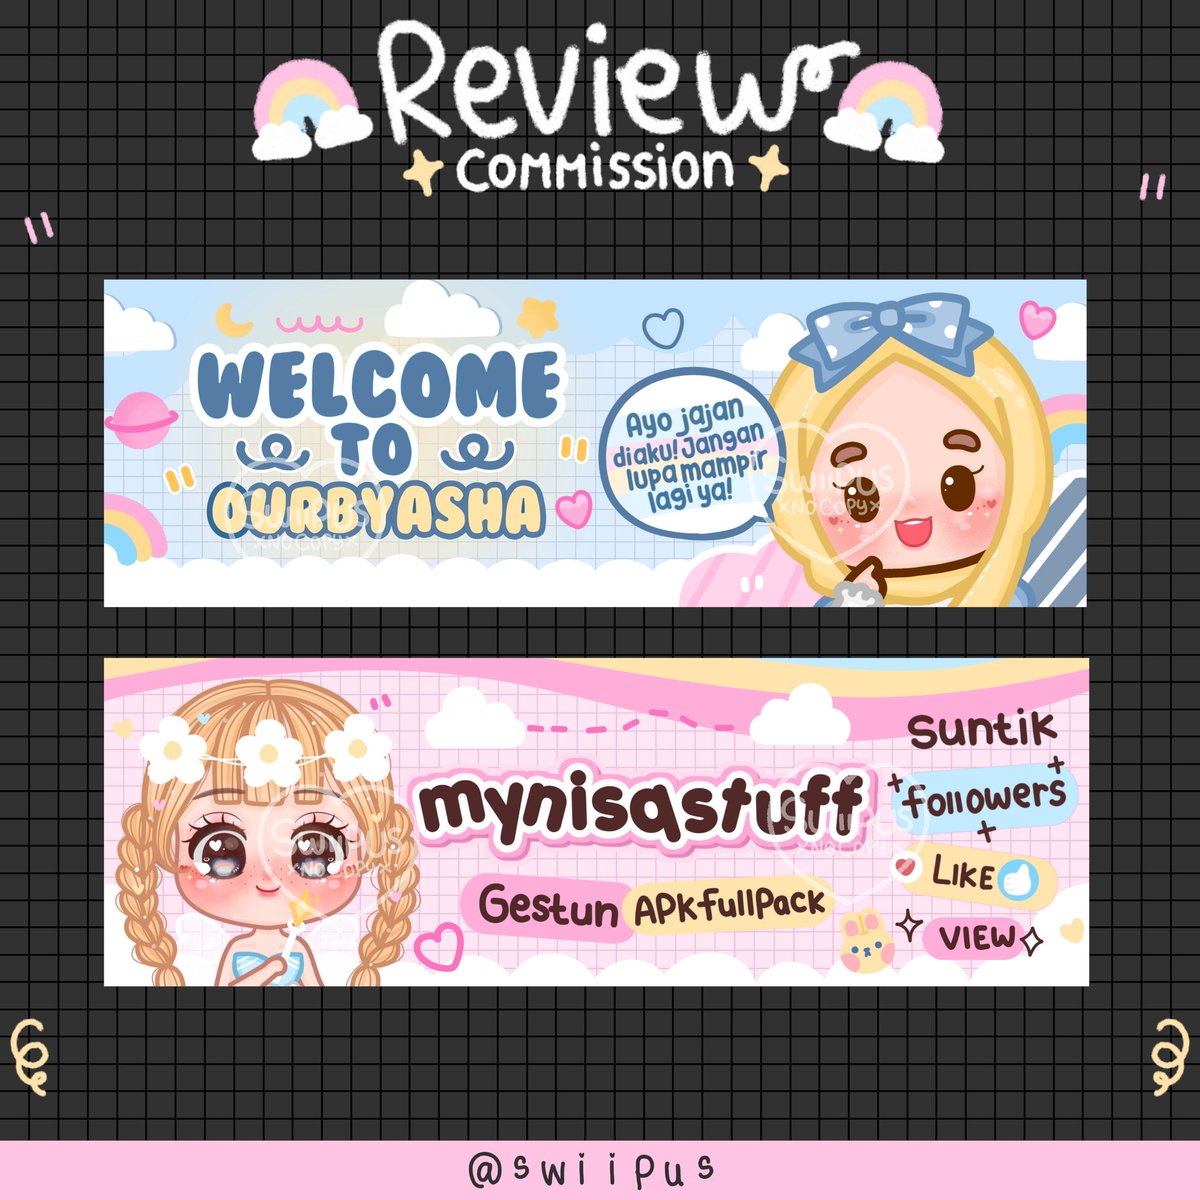 [ RT & LIKE ARE REALLY APPRECIATE ❤ ] Commission layout chibi terimakasih sudah commission di @swiipusss My commission always open, feel free to dm me anytime if you're interested! #zonauang #zonakaryaid #zonajajan #ZonaBA